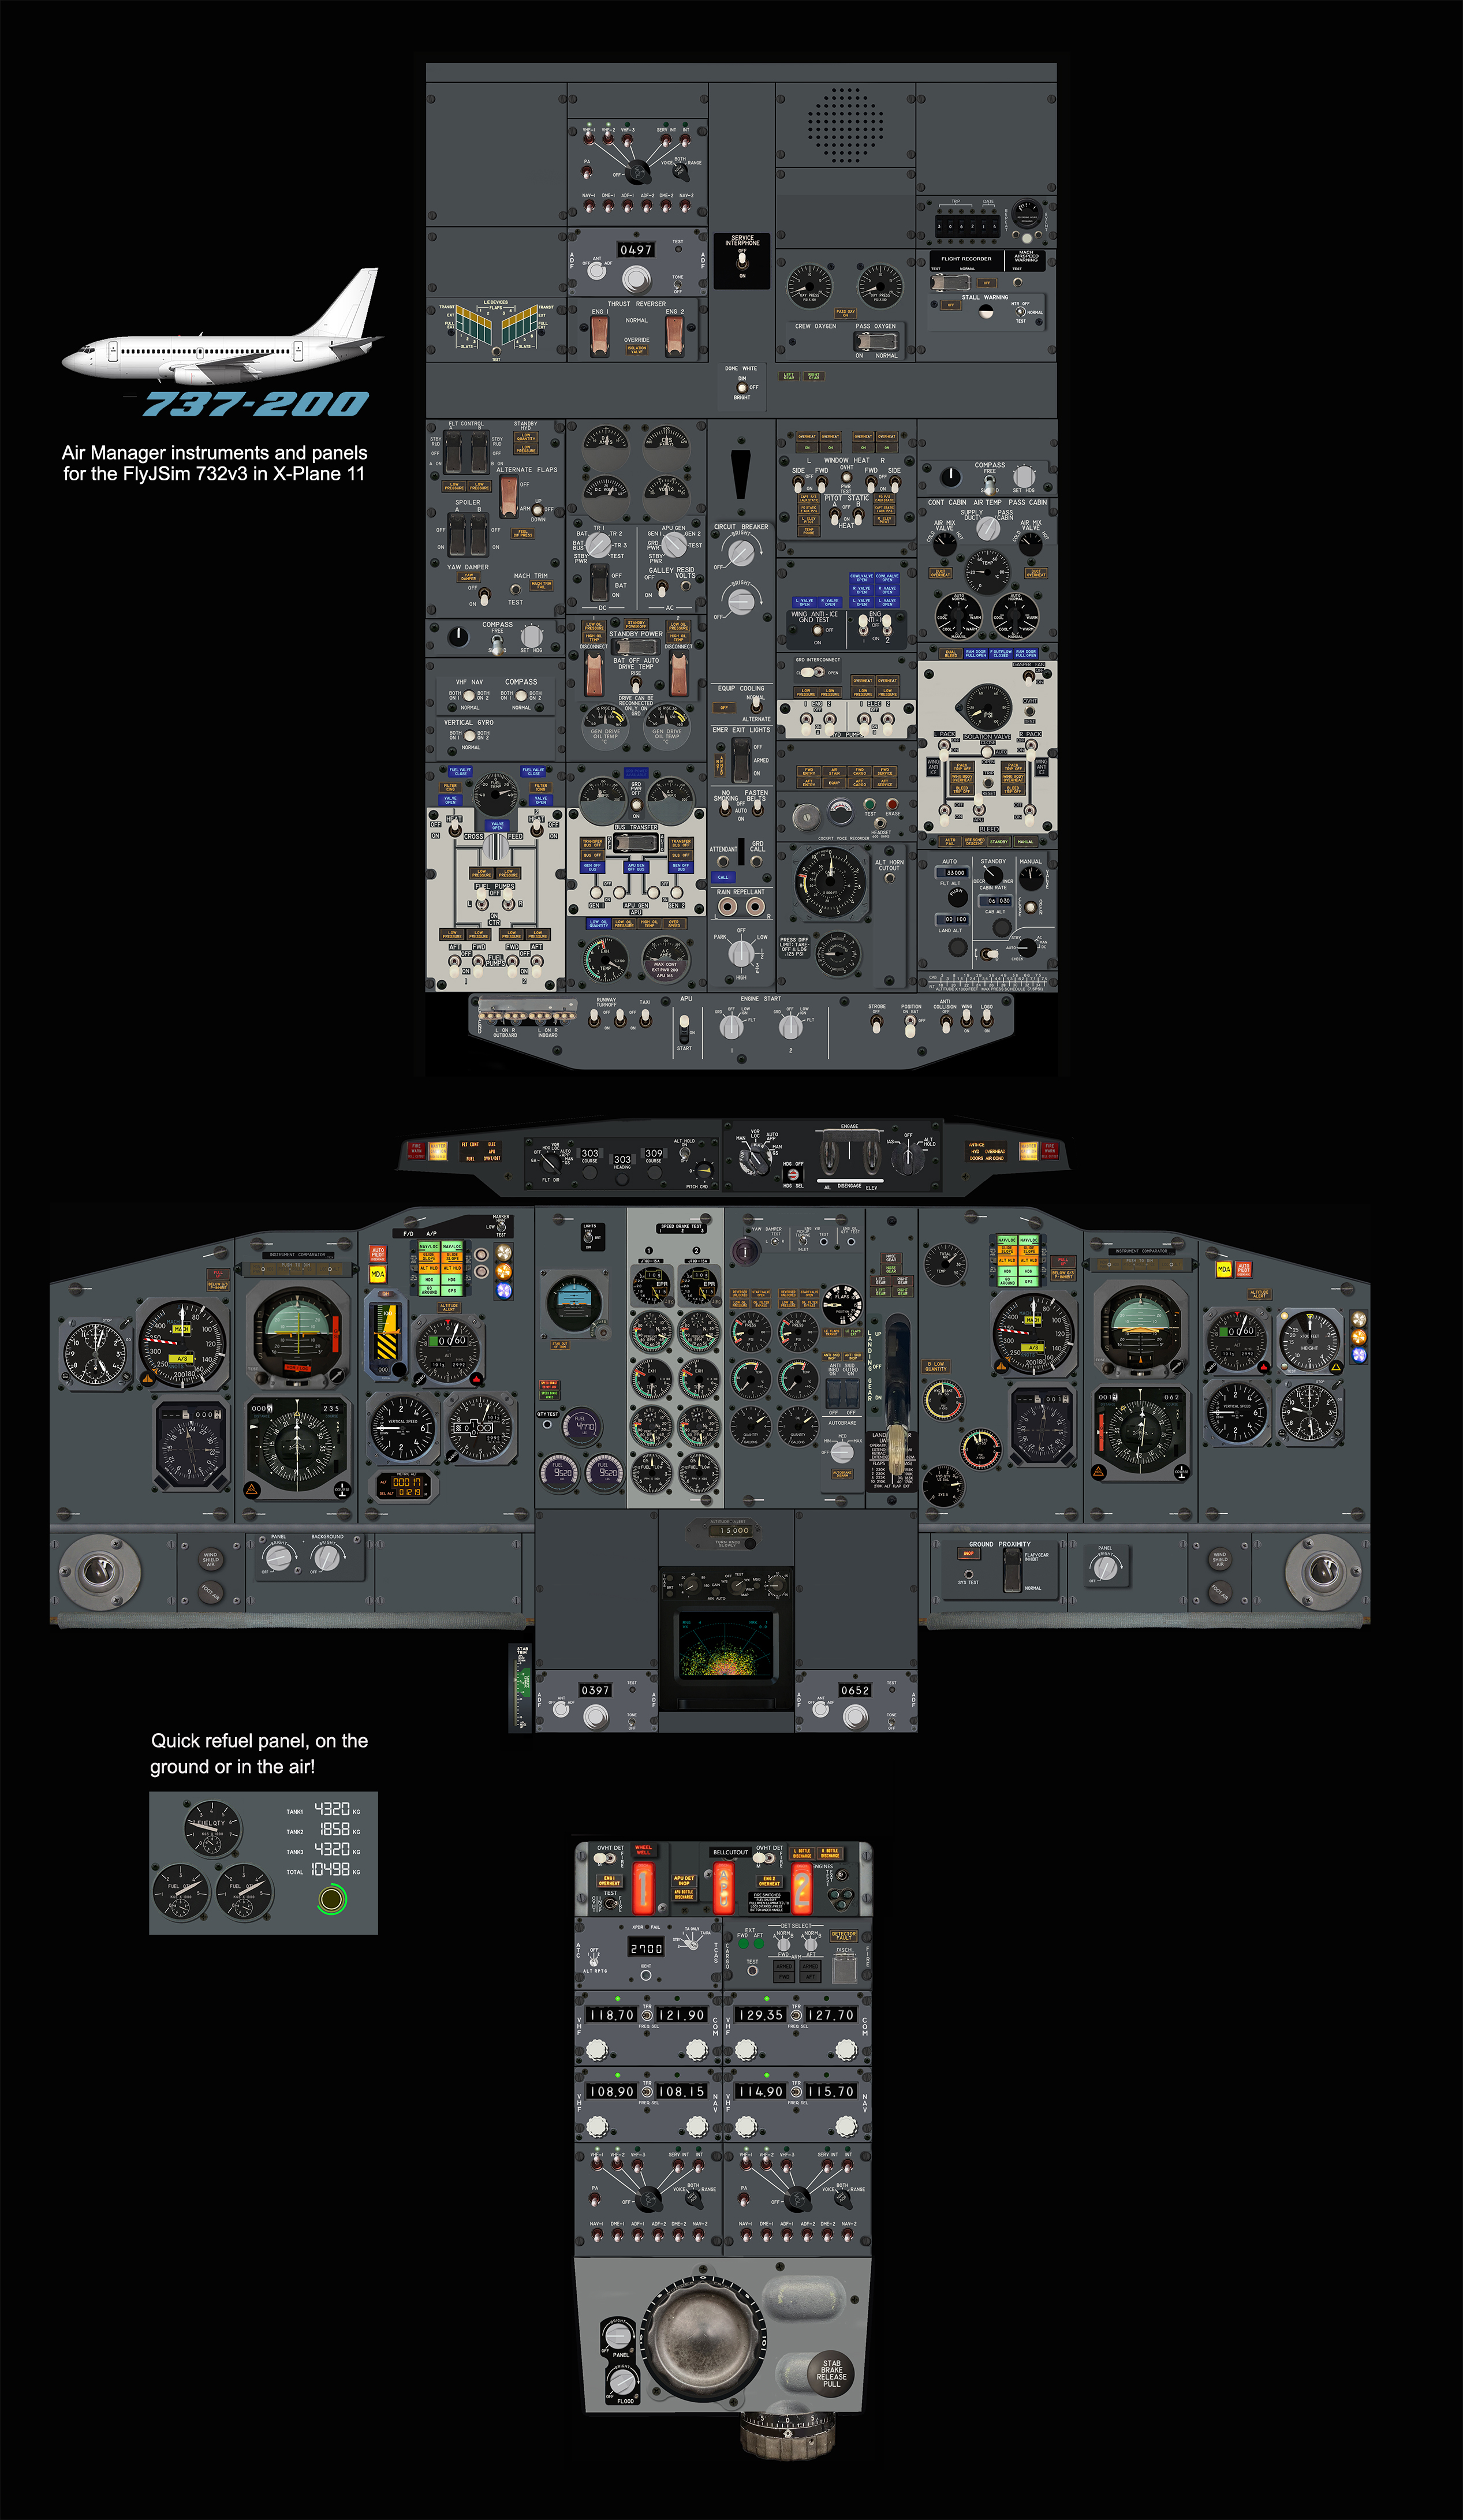 Updated 737-200 panels